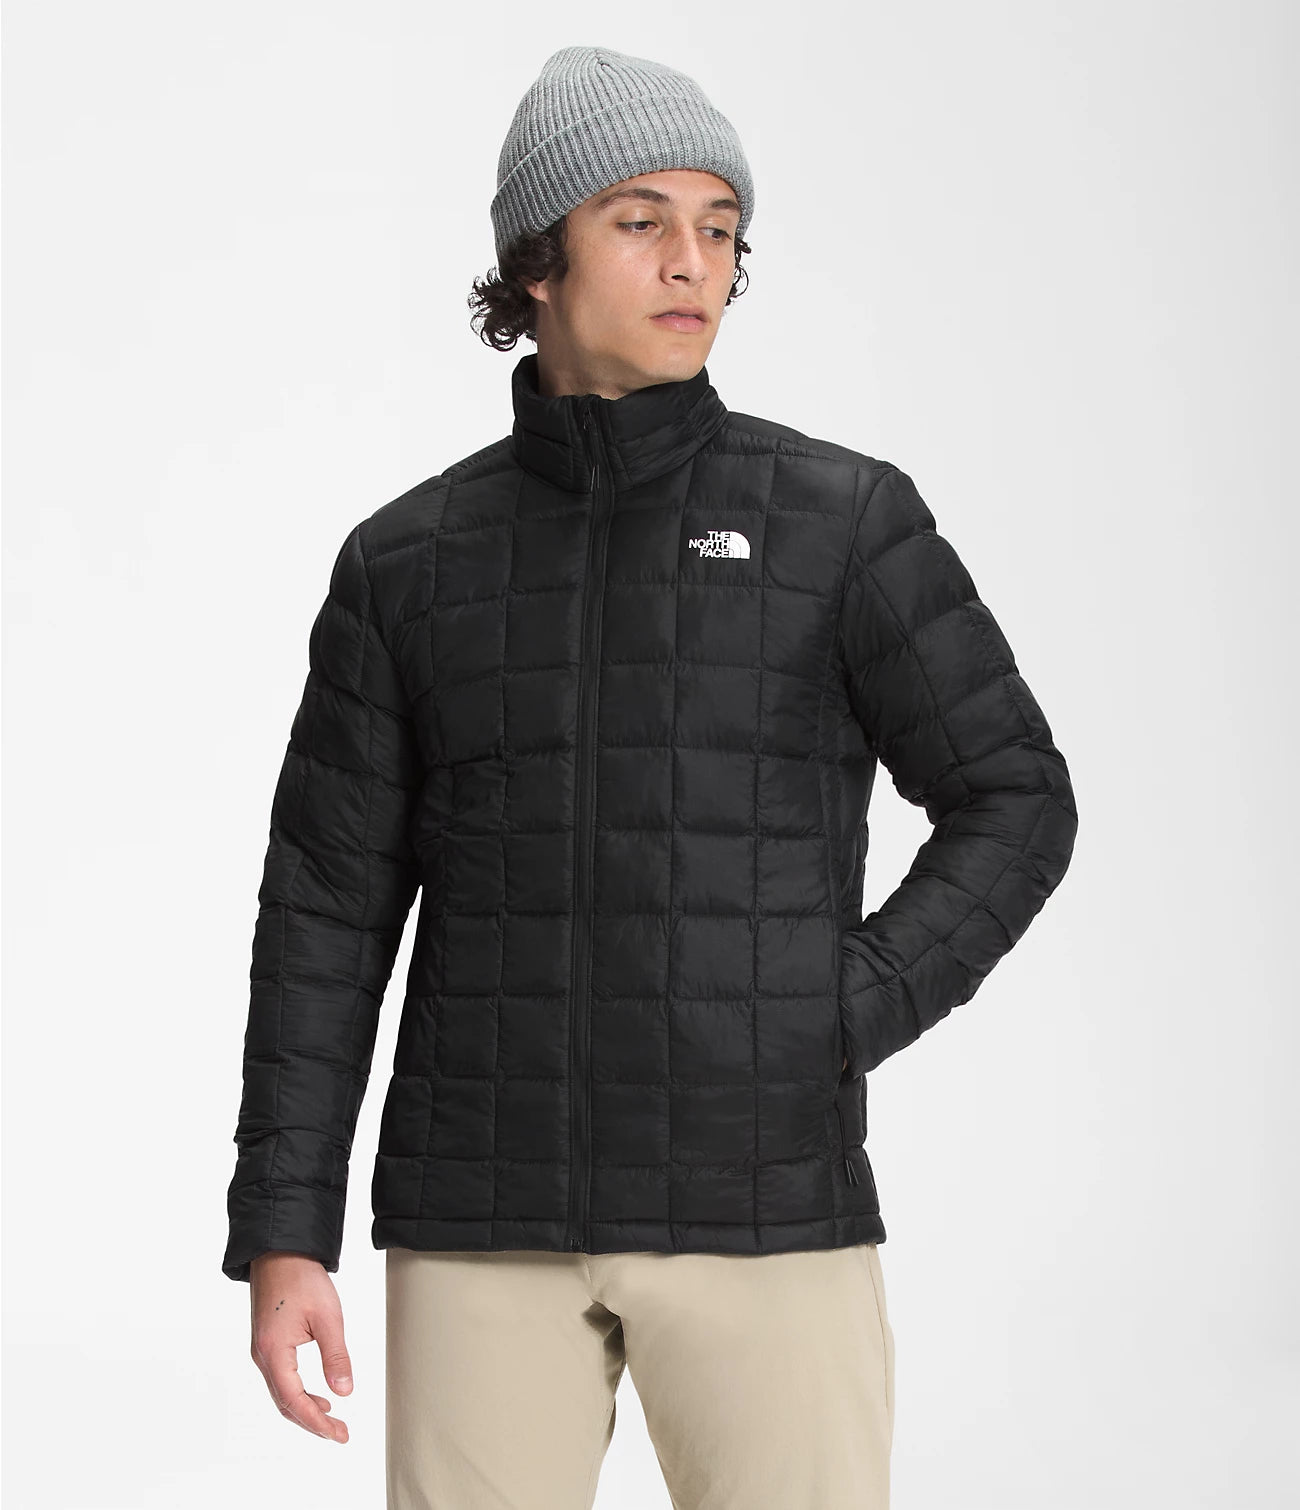 M THERMOBALL ECO JACKET 2.0